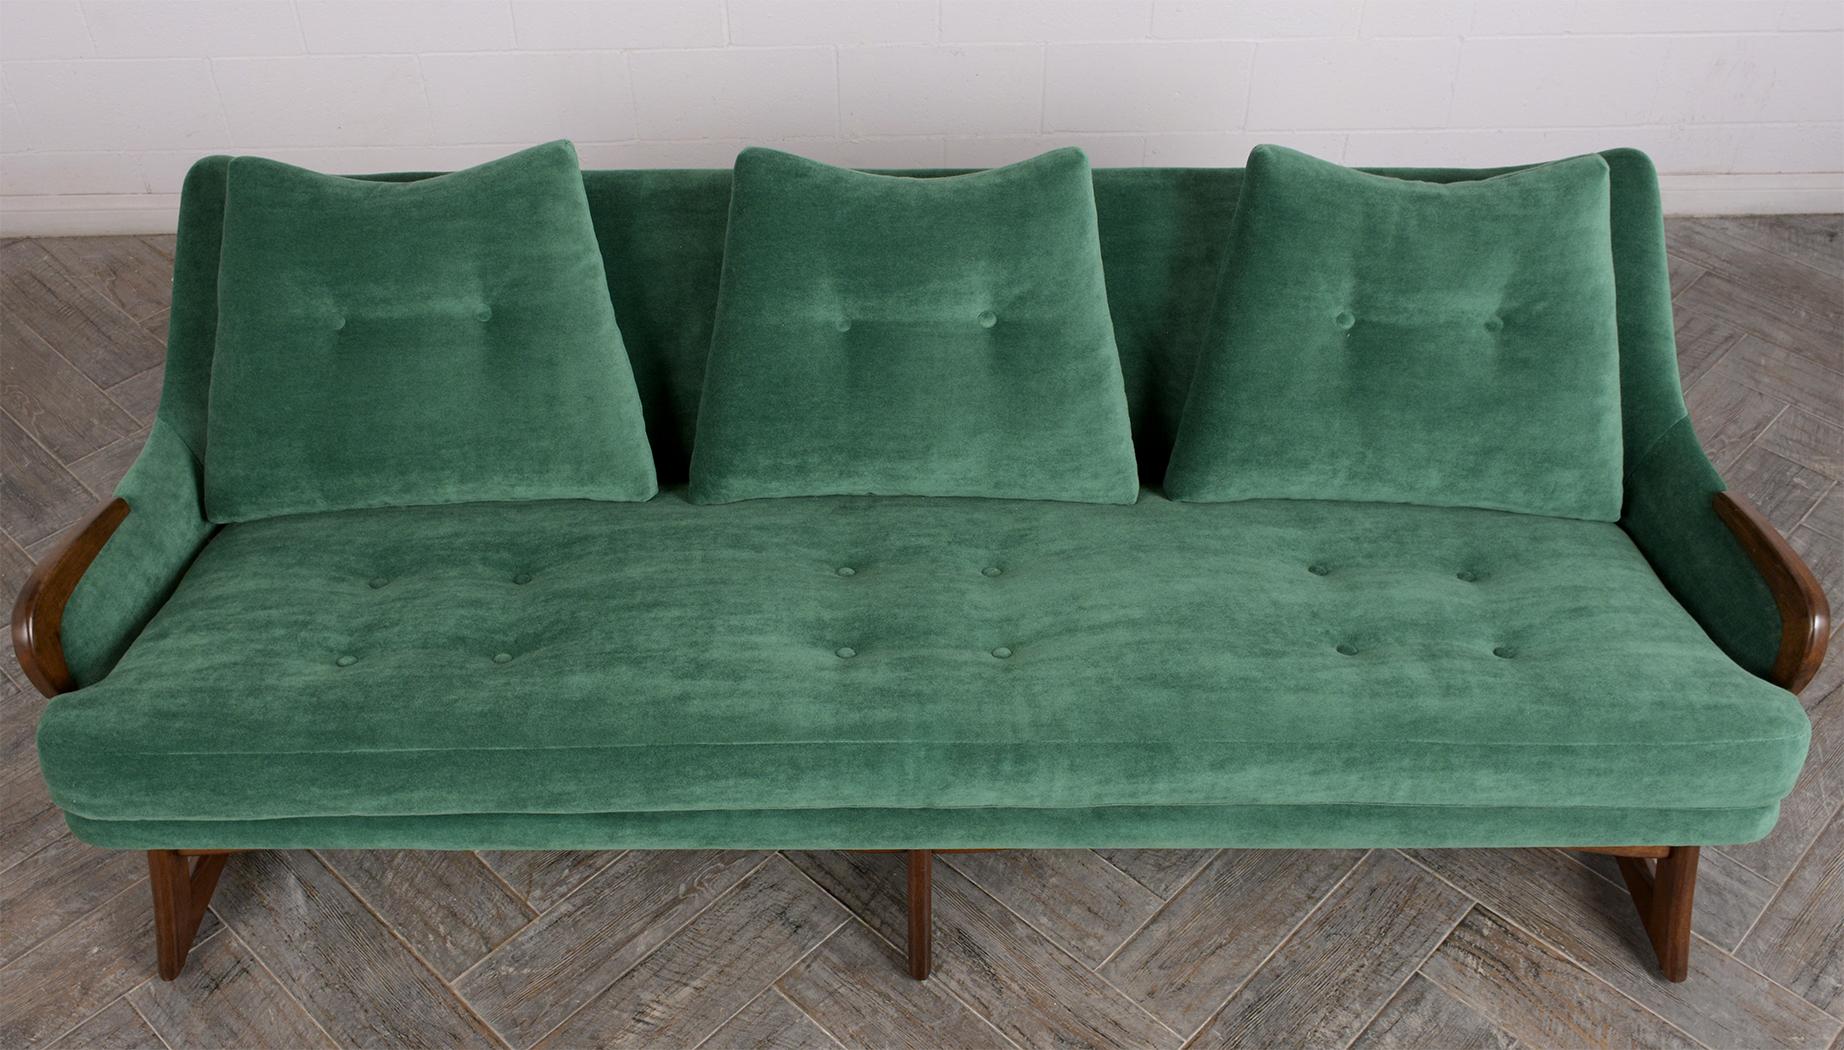 This Mid-Century Modern sofa attributed to Adrian Pearsall has been professionally restored and features a unique stylish walnut frame with a newly lacquered finish. The sofa has also been professionally reupholstered in a dark green color velvet